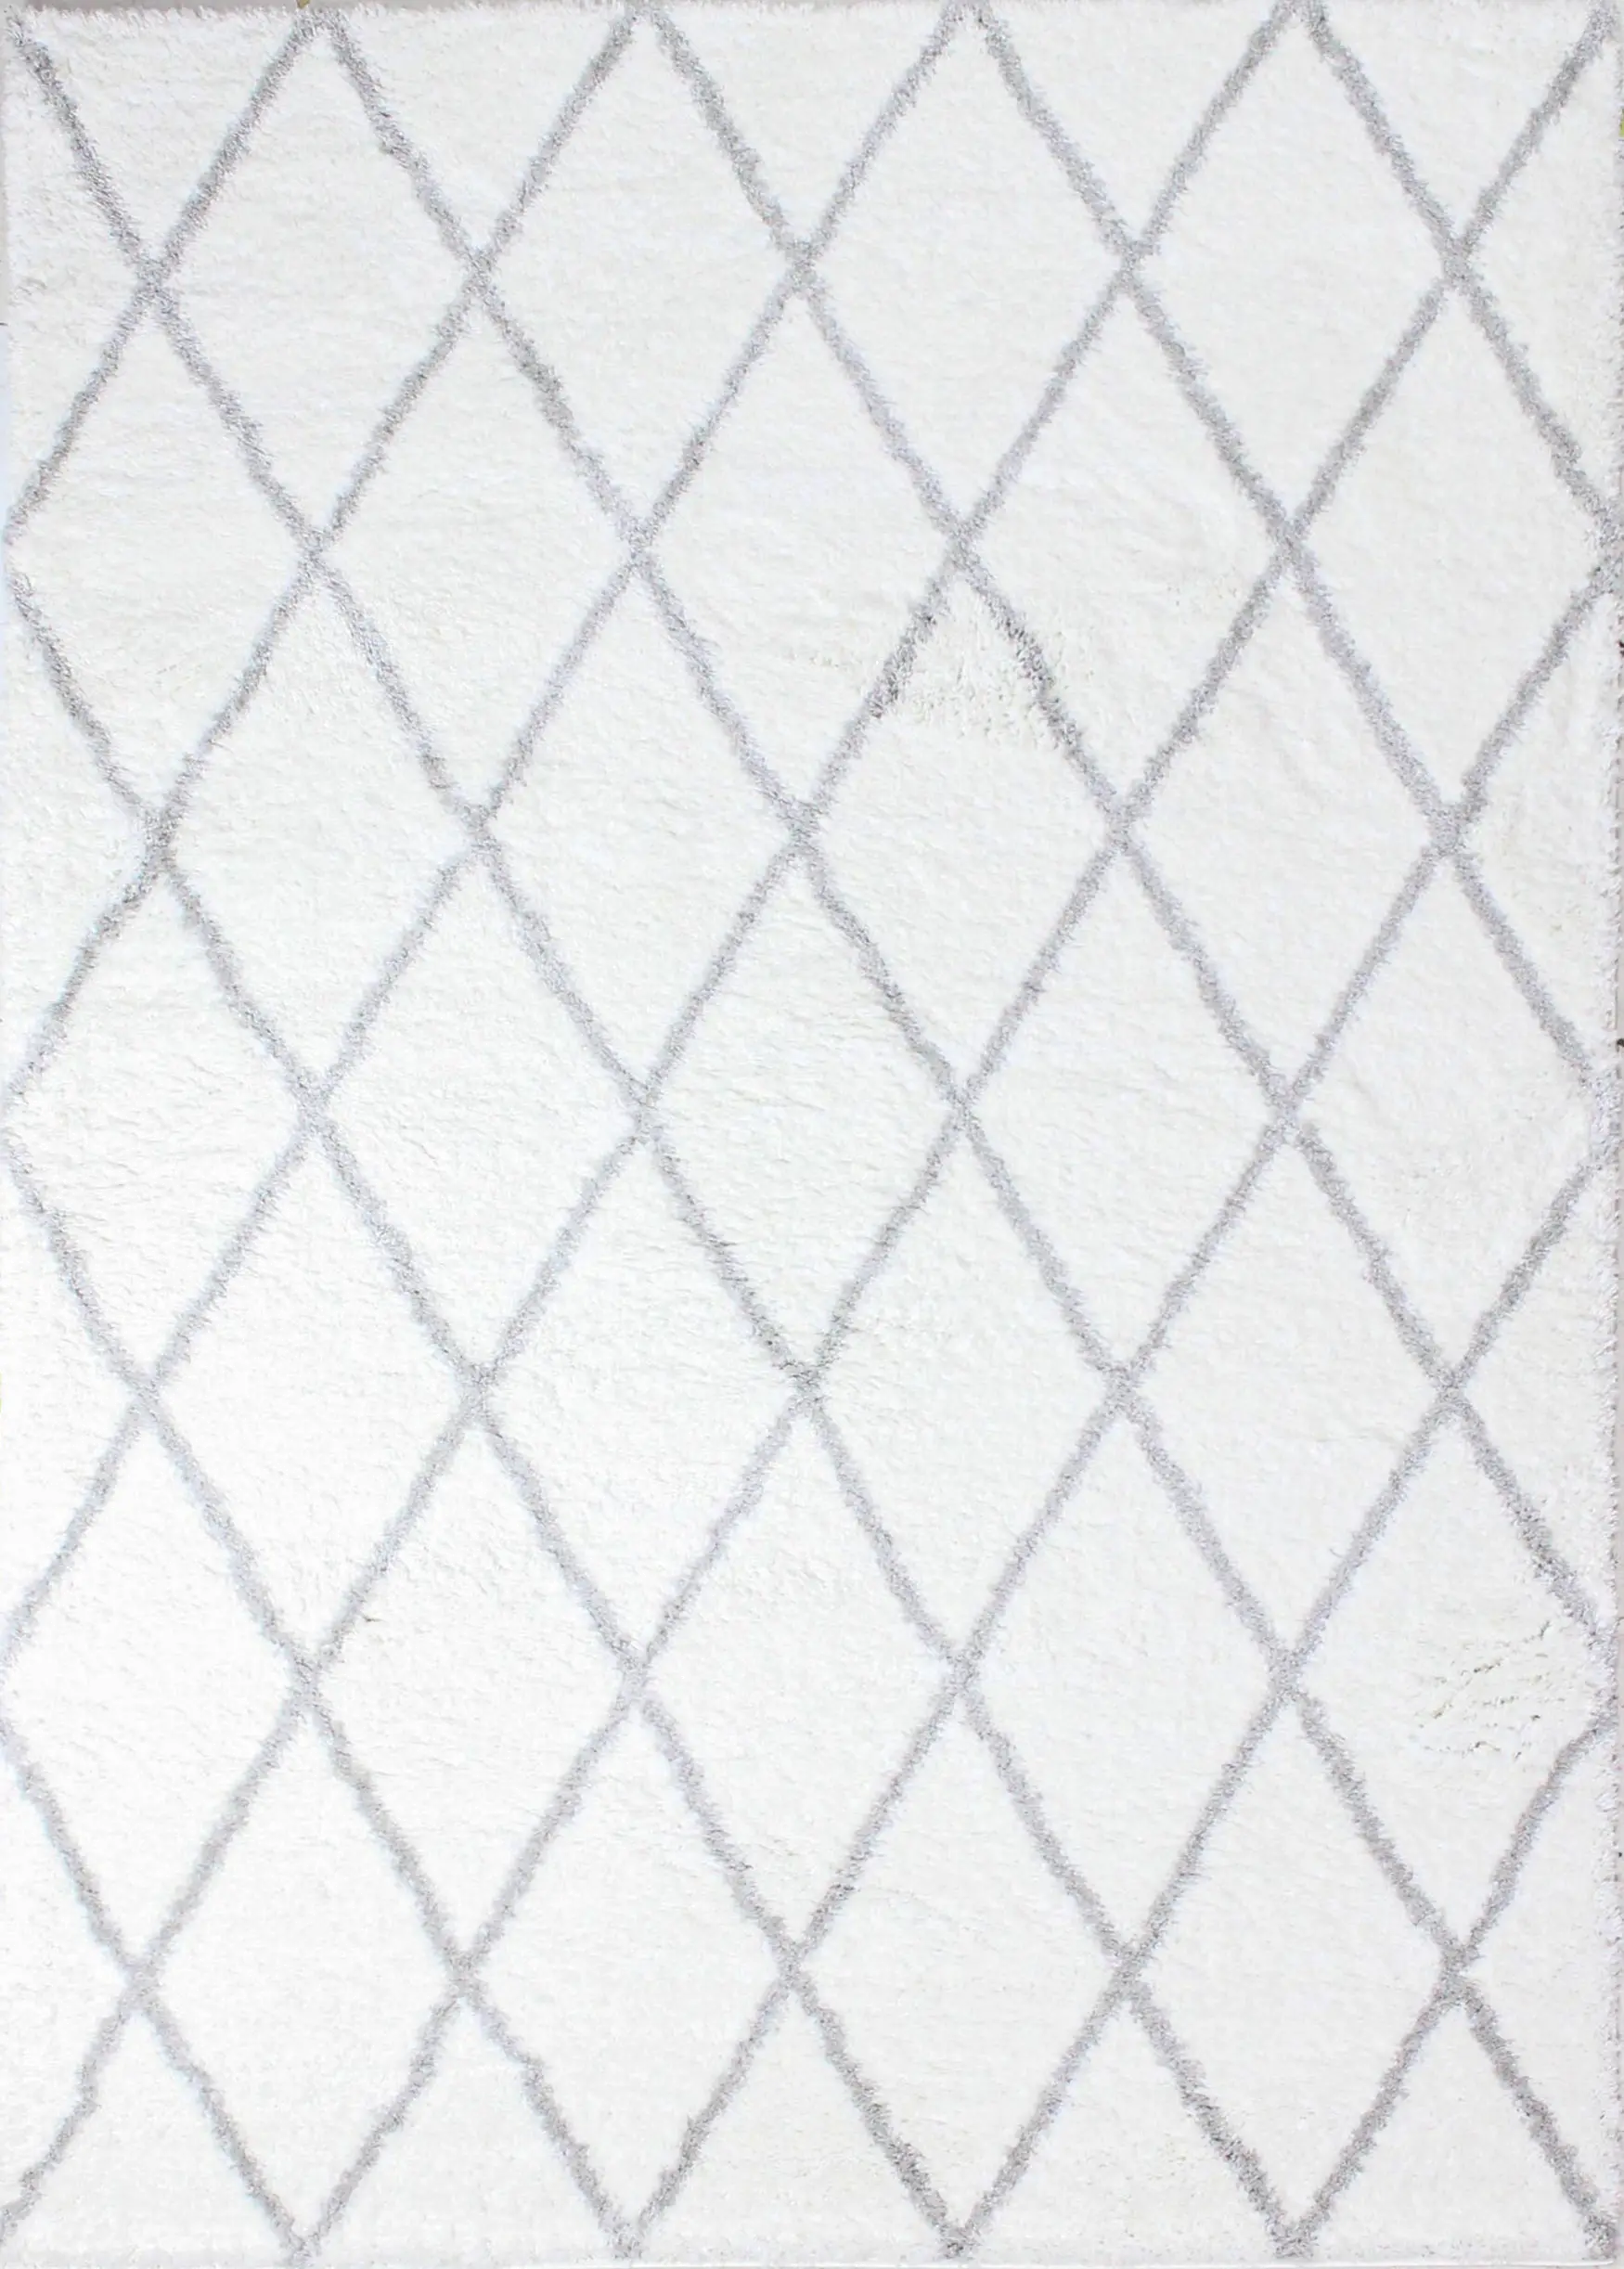 Faris White and Gray 8 x 10 Area Rug